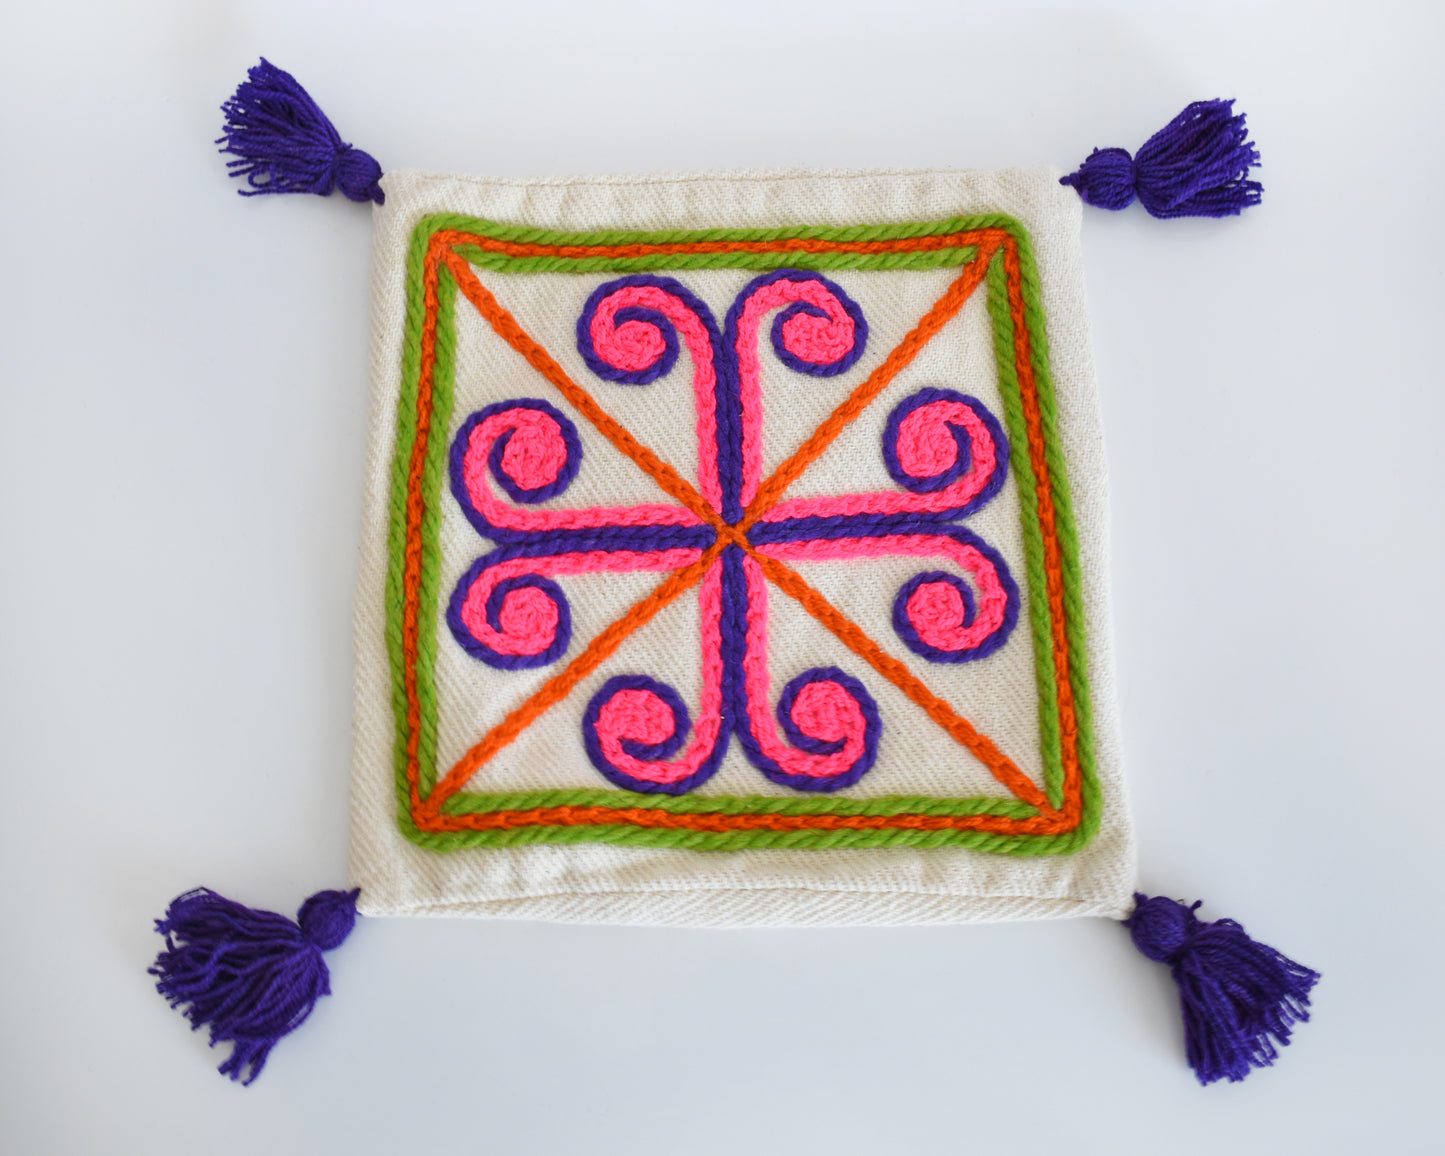 A vintage crewel embroidered pillow cover with purple tassels on a table.